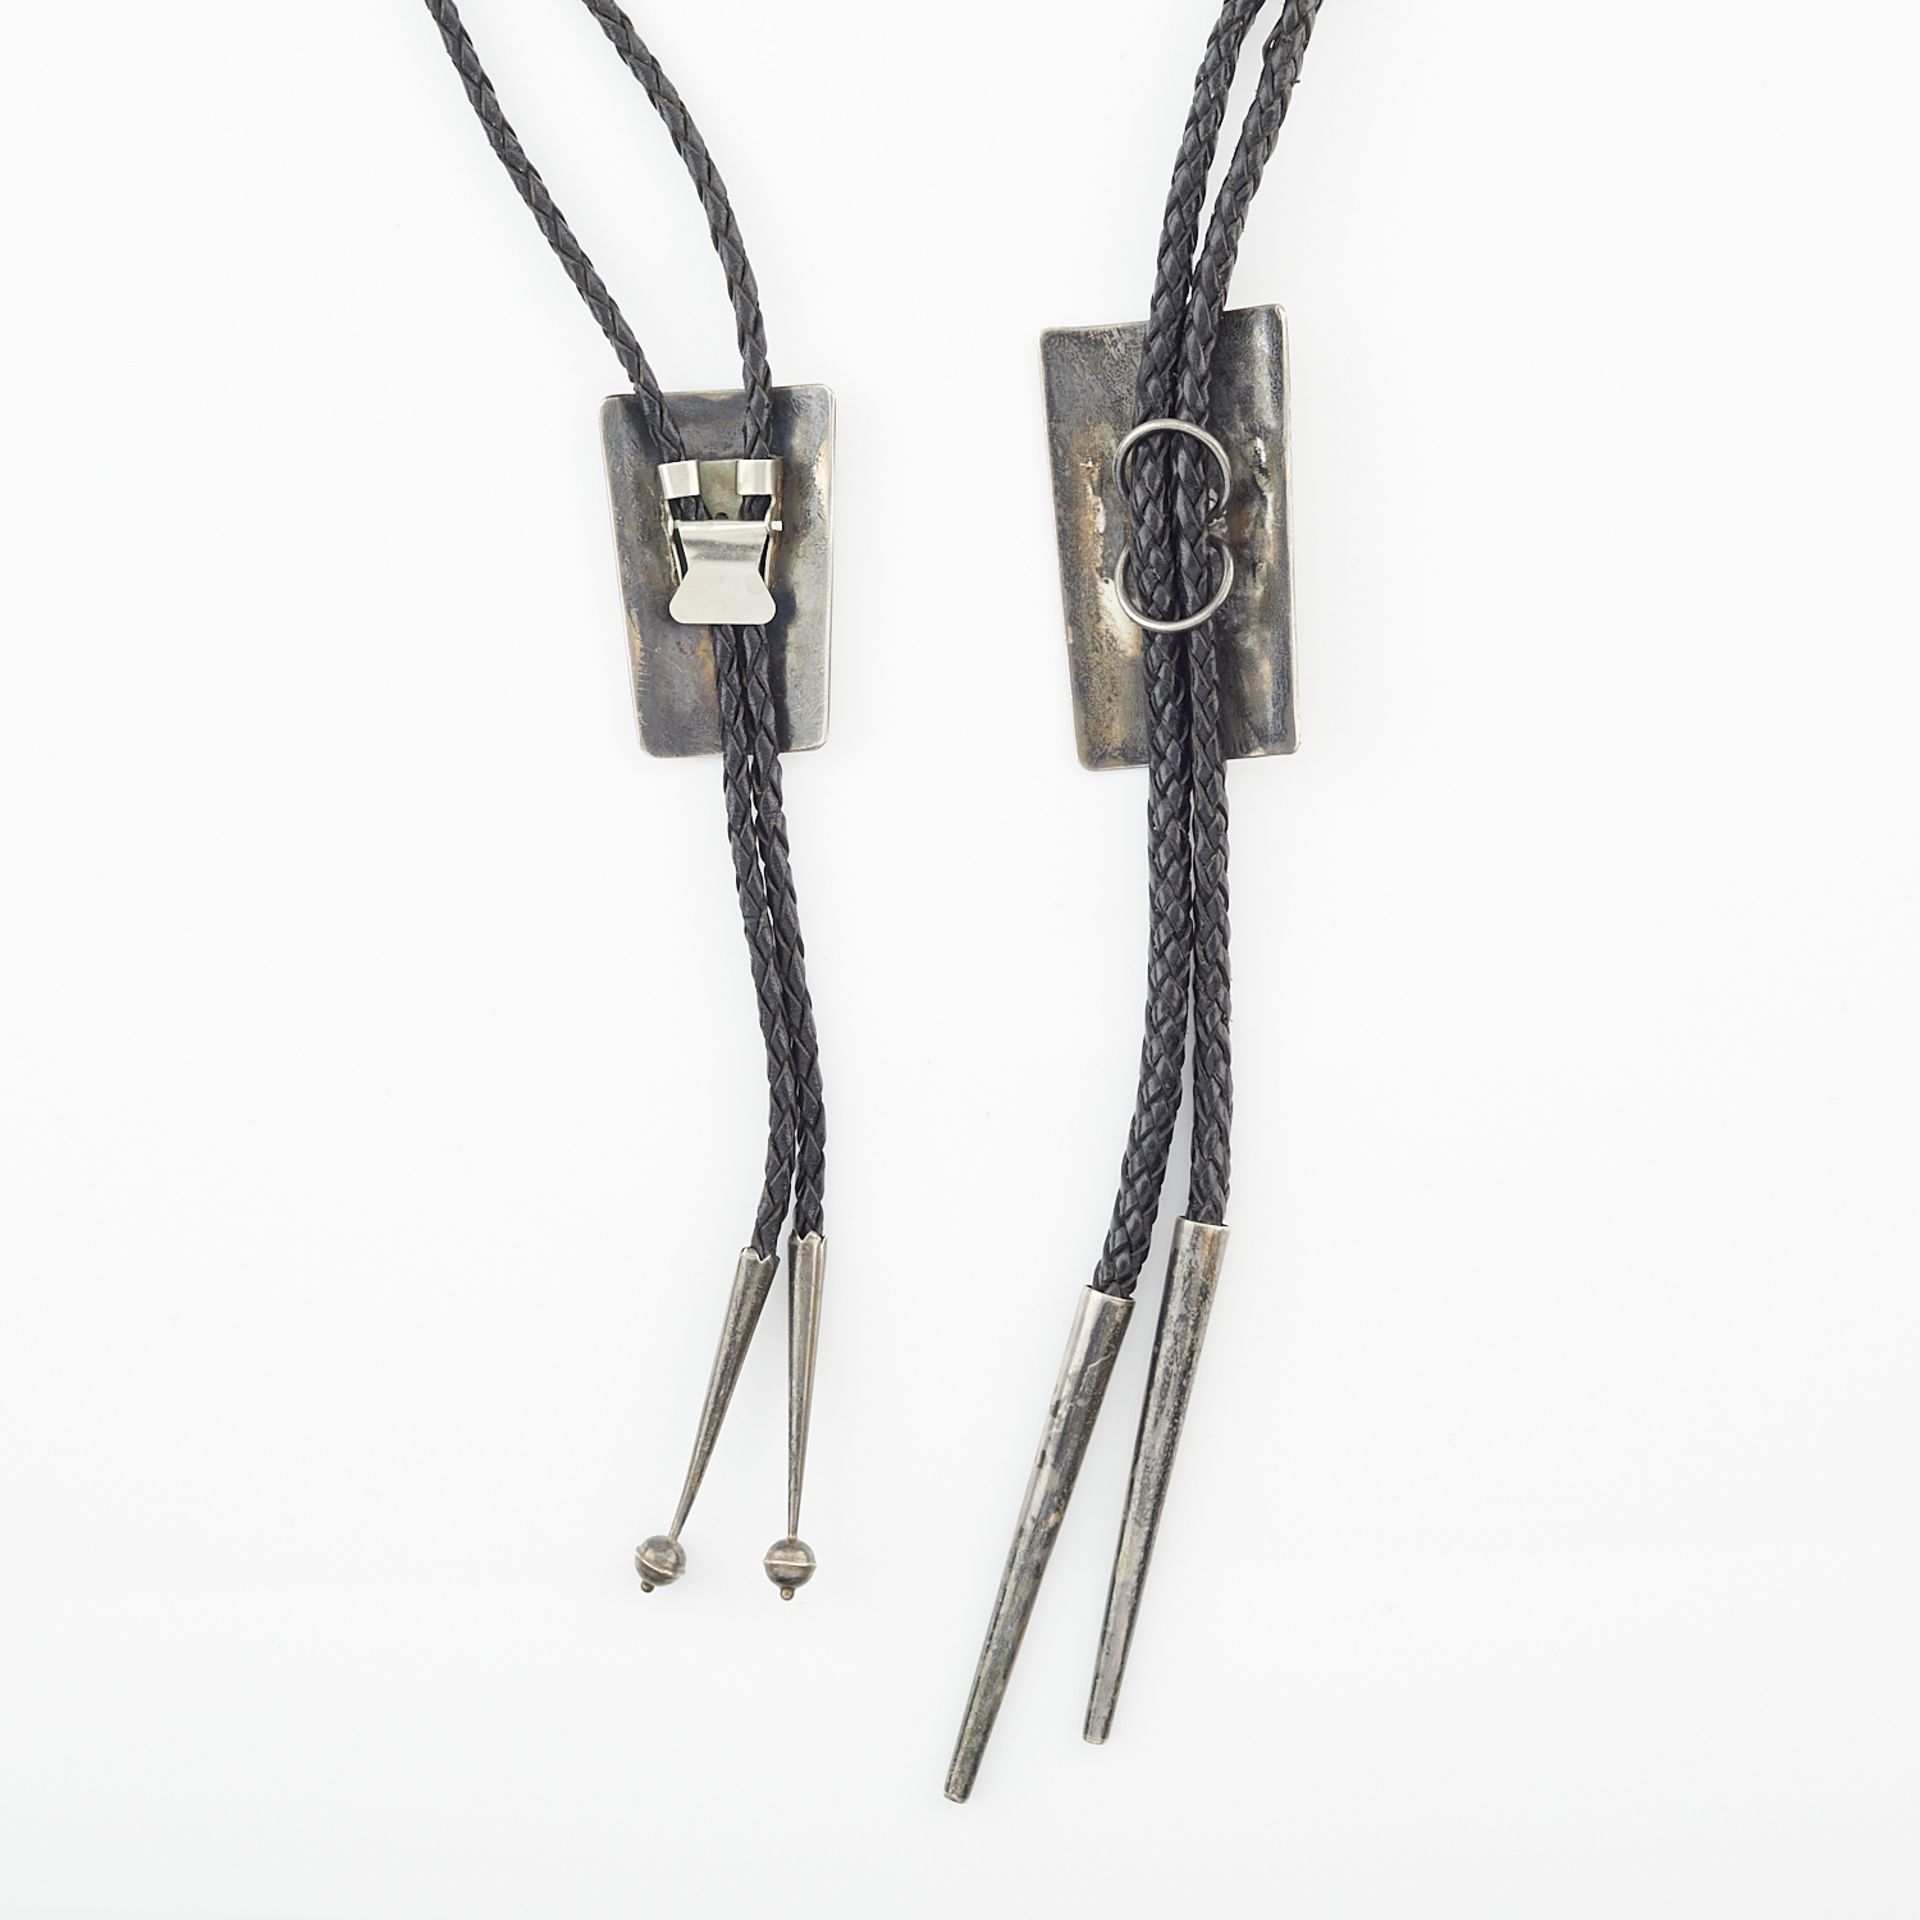 2 Southwest Bolo Ties - Image 5 of 13